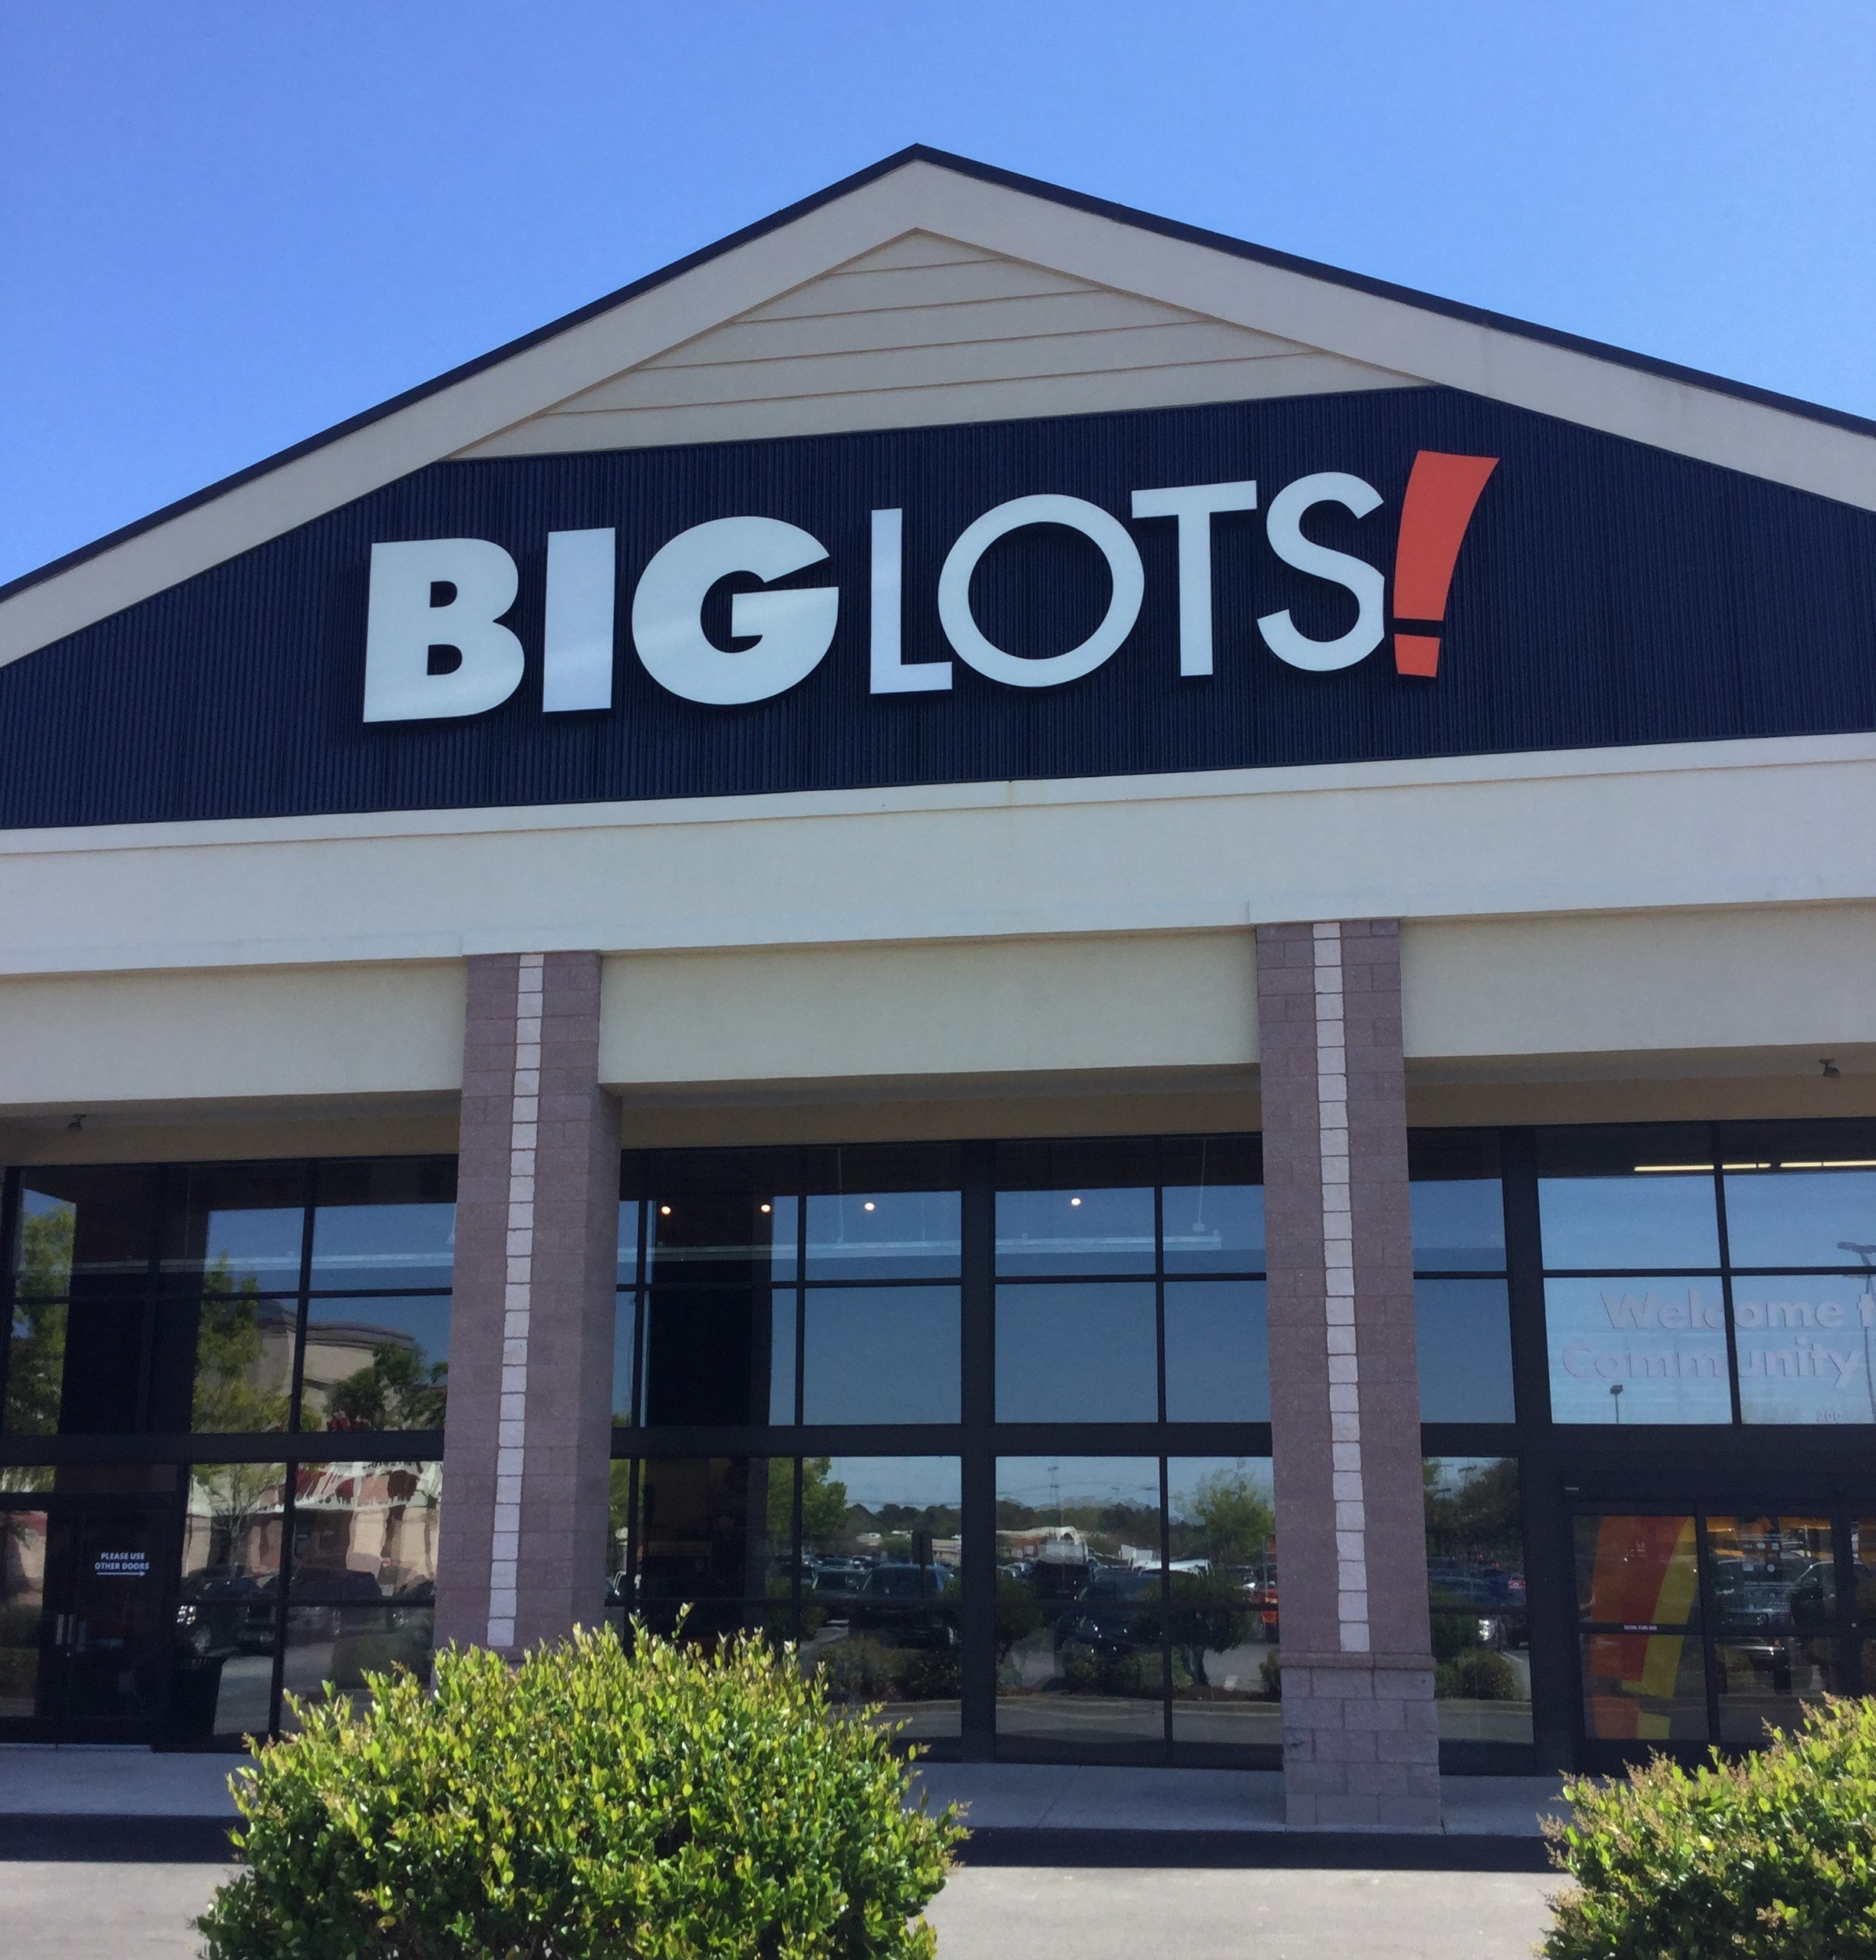 Visit The Big Lots In North Charleston Sc Located On 7620 Rivers Ave